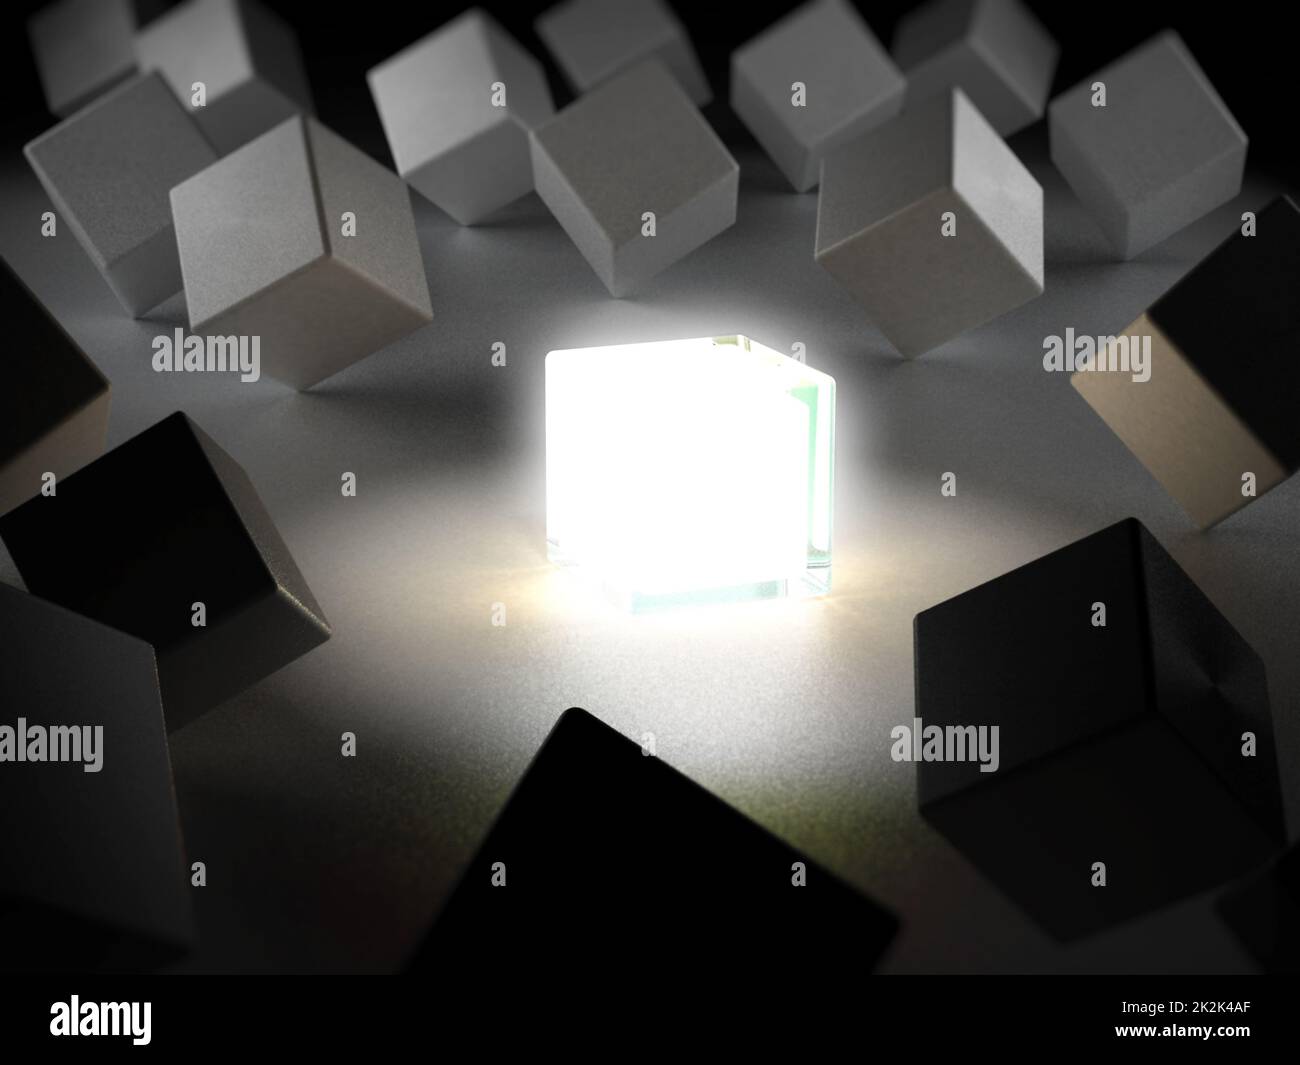 Box emitting light standing out among boxes. 3D illustration Stock Photo